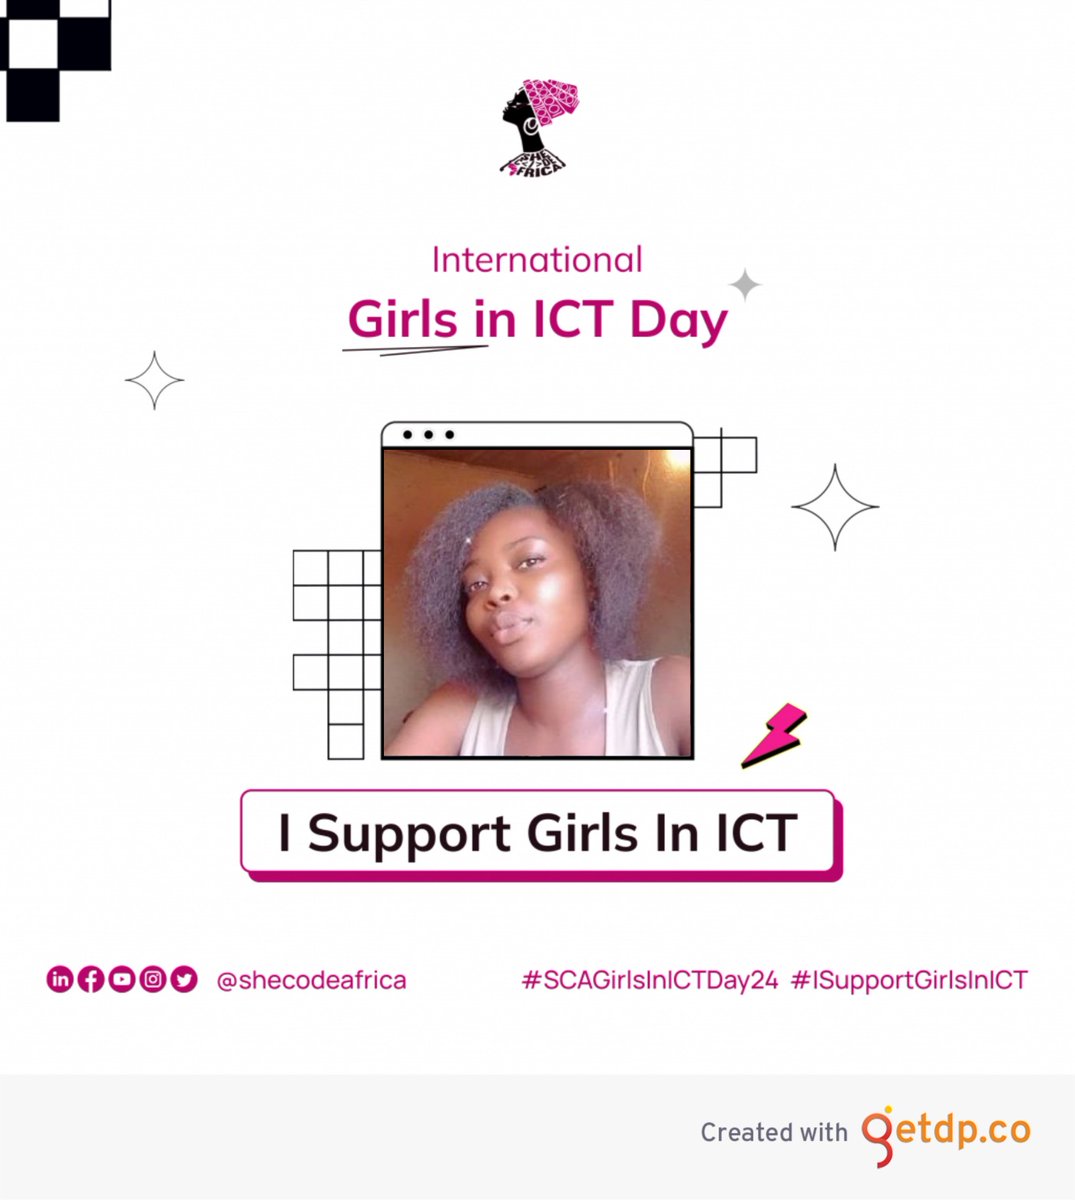 Today we celebrate all the women in ICT 🤗
I am super excited I got accepted into the @SheCodeAfrica community on a remarkable day like this 🎉🎉
We are brave, smart, intelligent and ambitious 
We are tech women 
#SCACommunity #ISupportGirlsInICT
#SCAGirlsInICTDay24